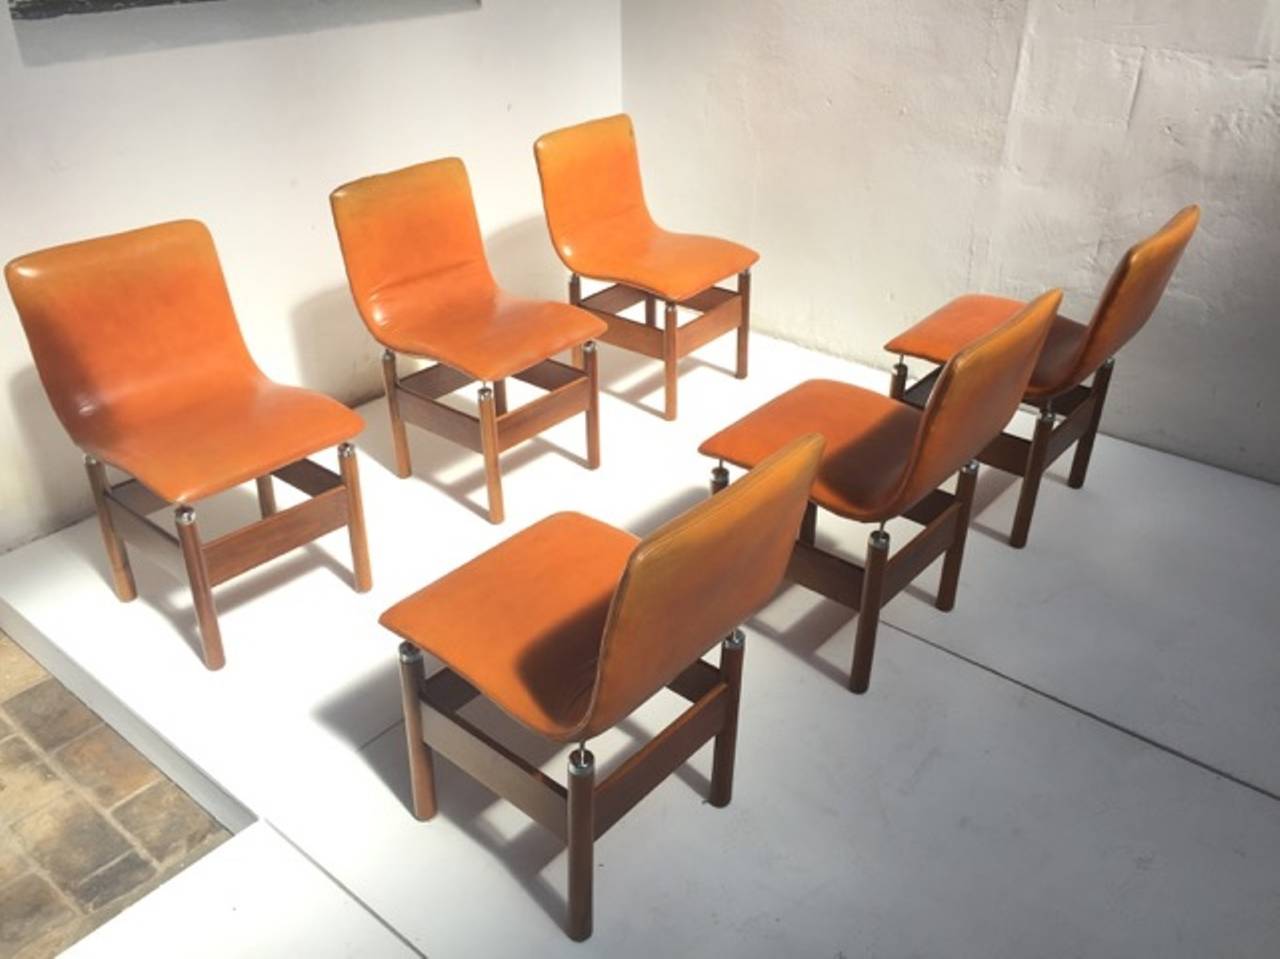 Wonderful set of six 'Chelsea' dining chairs by Vittorio Introini in the very rare original leather and solid walnut finish specification. The 'Chelsea' chair was designed in 1966 for the progressive design company Saporiti.

The seats are